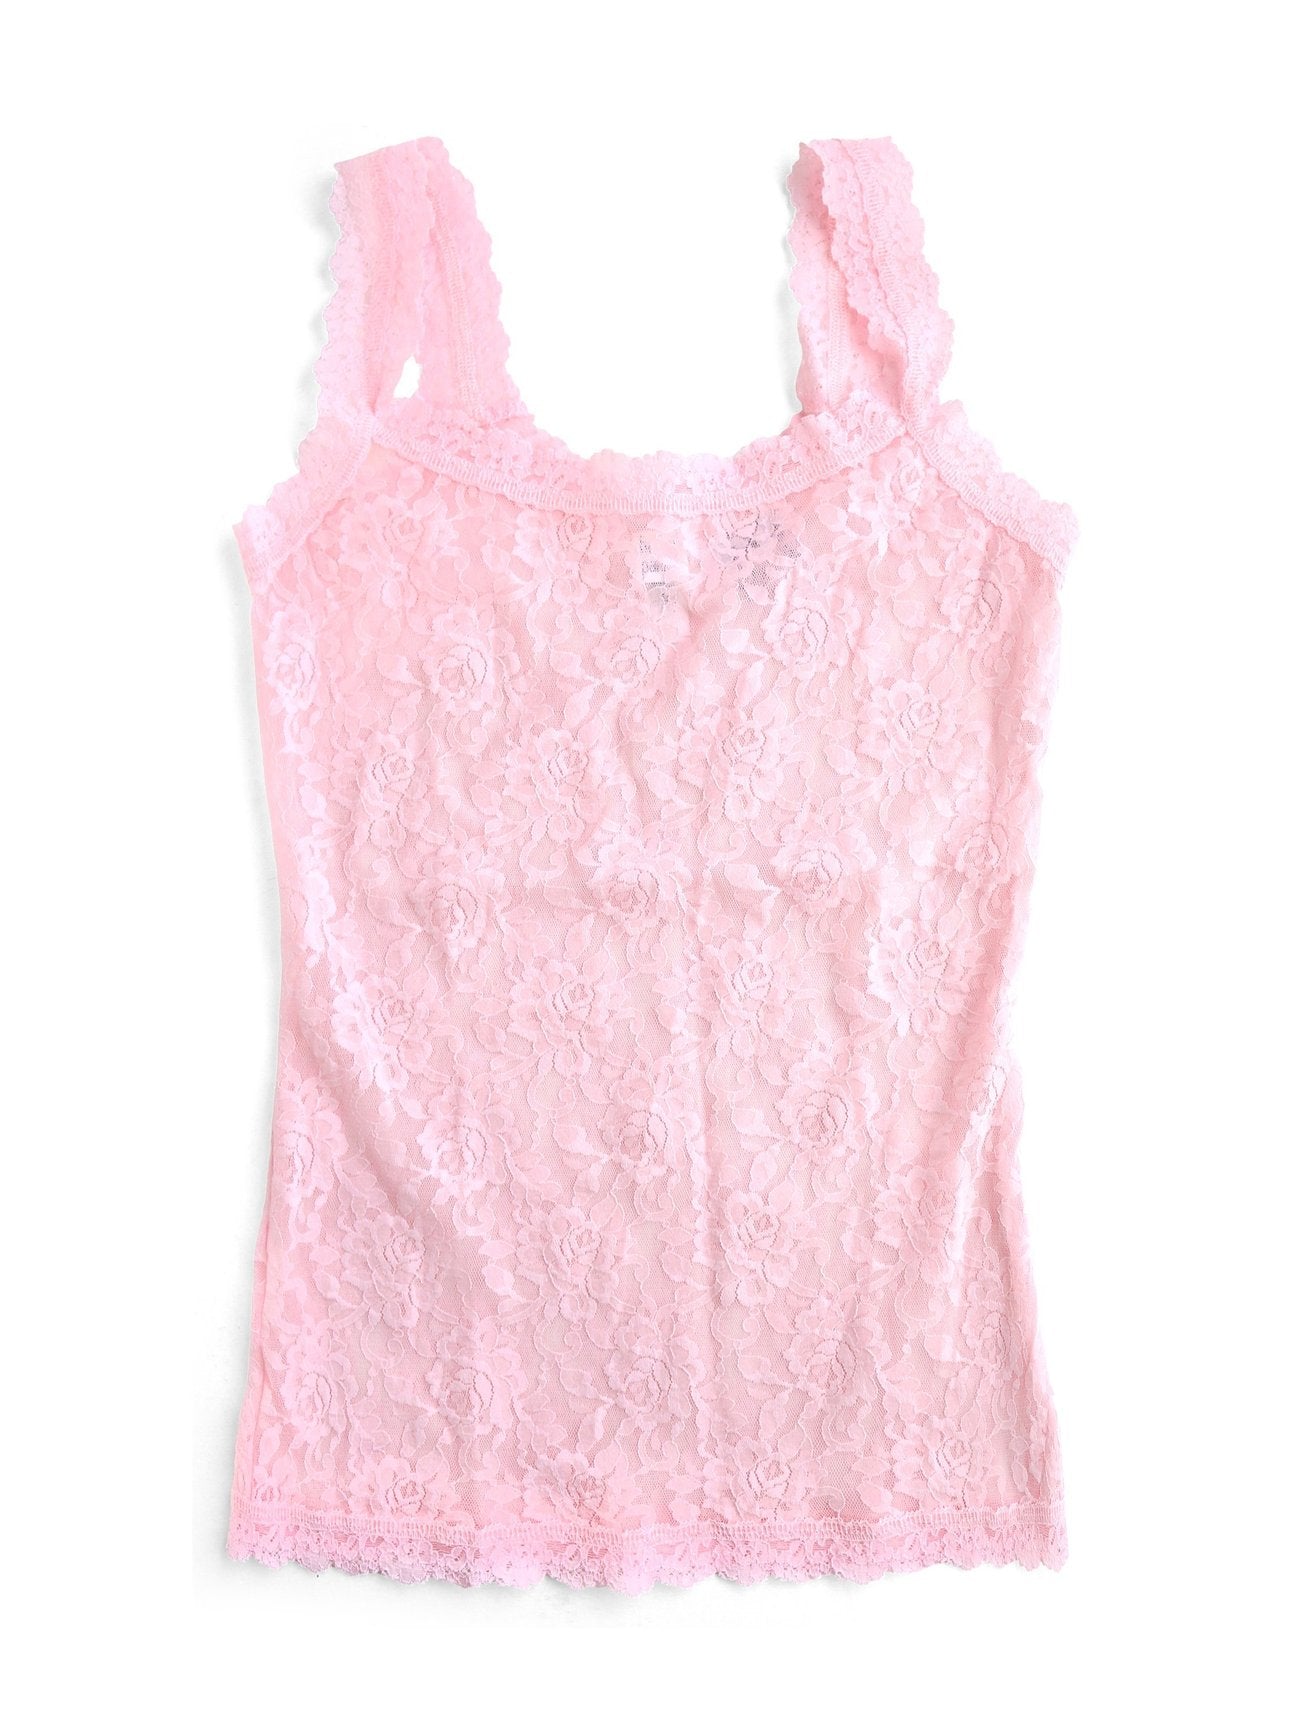 Signature Lace Classic Cami - Bliss Pink